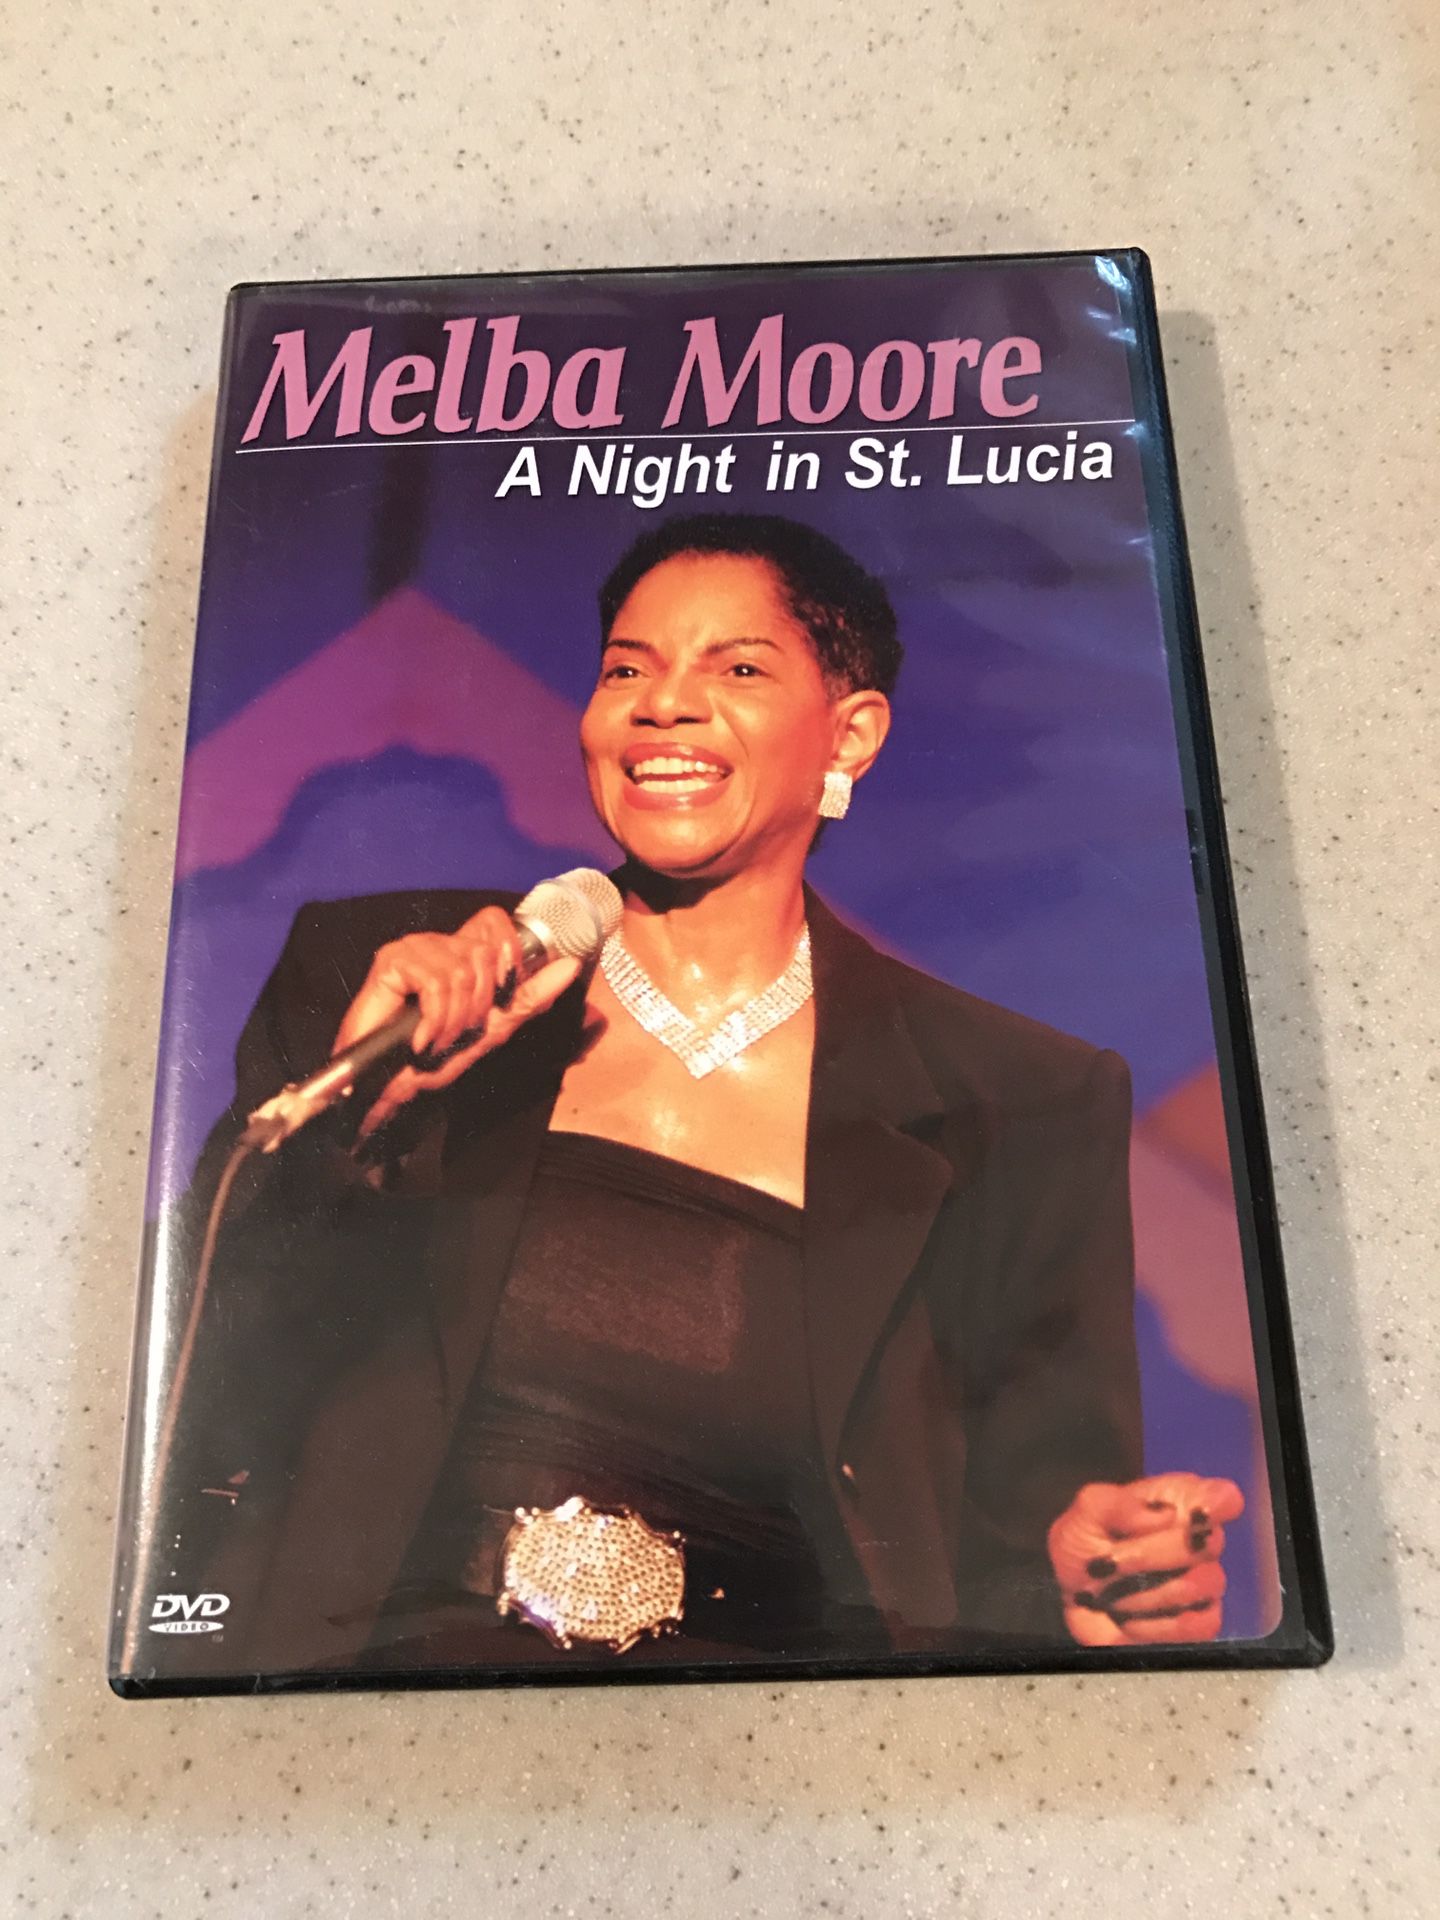 “Melba Moore: A Night in St. Lucia” DVD